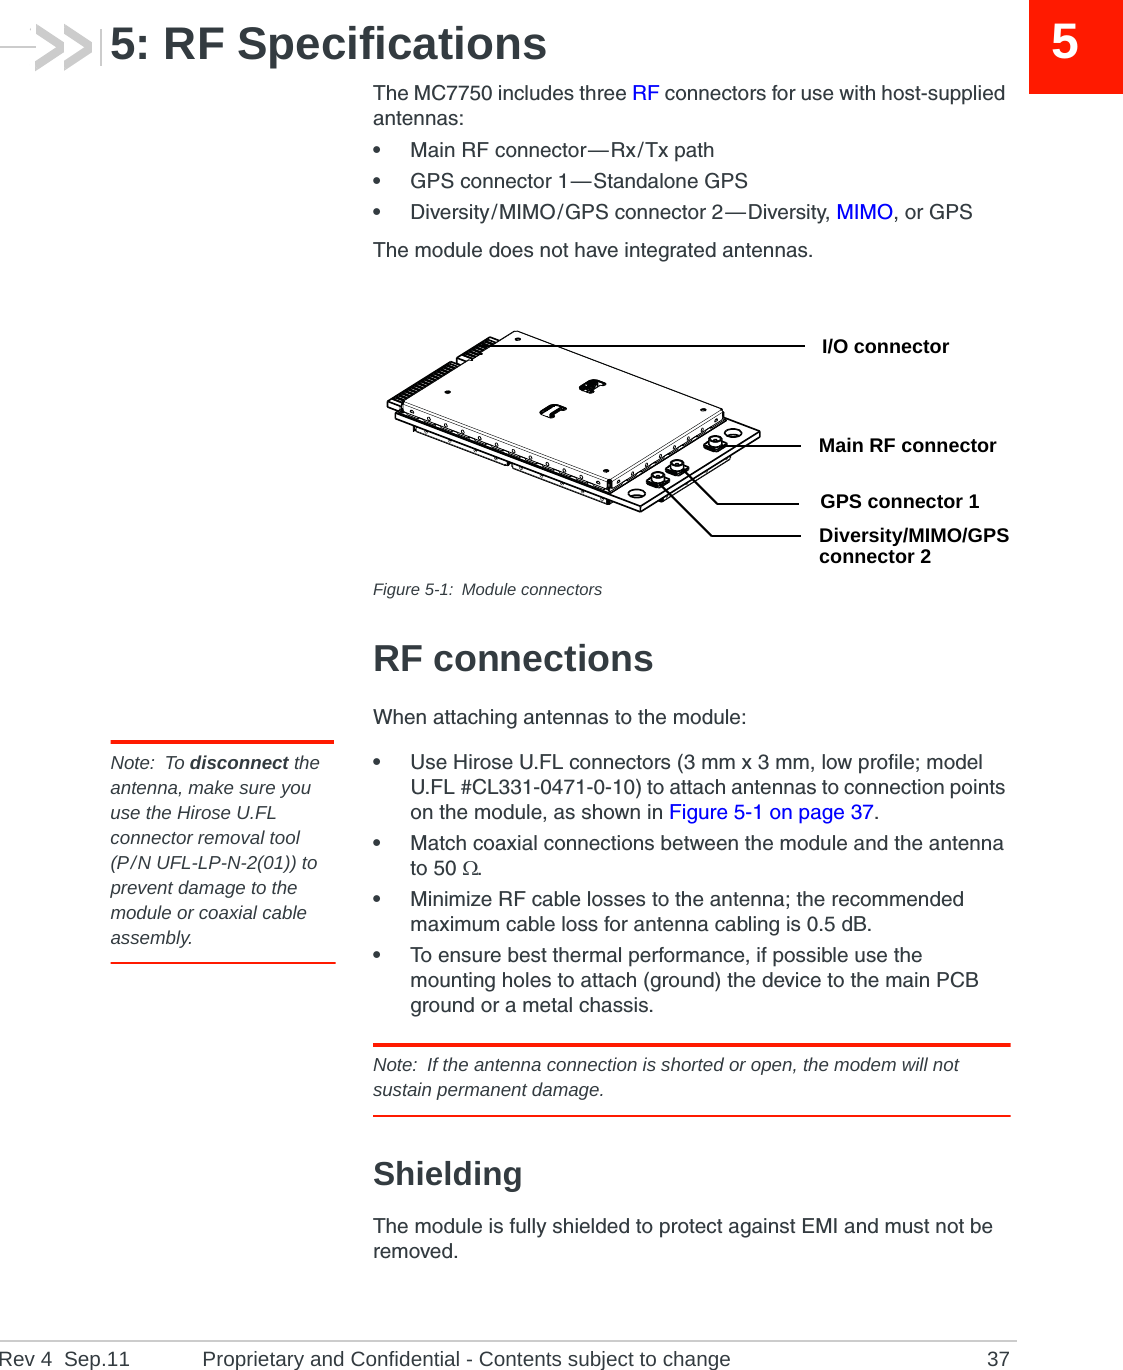 Rev 4  Sep.11 Proprietary and Confidential - Contents subject to change 3755: RF SpecificationsThe MC7750 includes three RF connectors for use with host-supplied antennas:•Main RF connector — Rx / Tx path•GPS connector 1 — Standalone GPS•Diversity / MIMO / GPS connector 2 — Diversity, MIMO, or GPSThe module does not have integrated antennas.Figure 5-1: Module connectorsRF connectionsWhen attaching antennas to the module:Note: To disconnect the antenna, make sure you use the Hirose U.FL connector removal tool(P / N UFL-LP-N-2(01)) to prevent damage to the module or coaxial cable assembly.•Use Hirose U.FL connectors (3 mm x 3 mm, low profile; model U.FL #CL331-0471-0-10) to attach antennas to connection points on the module, as shown in Figure 5-1 on page 37.•Match coaxial connections between the module and the antenna to 50 .•Minimize RF cable losses to the antenna; the recommended maximum cable loss for antenna cabling is 0.5 dB.•To ensure best thermal performance, if possible use the mounting holes to attach (ground) the device to the main PCB ground or a metal chassis.Note: If the antenna connection is shorted or open, the modem will not sustain permanent damage.ShieldingThe module is fully shielded to protect against EMI and must not be removed.I/O connectorMain RF connectorGPS connector 1Diversity/MIMO/GPSconnector 2